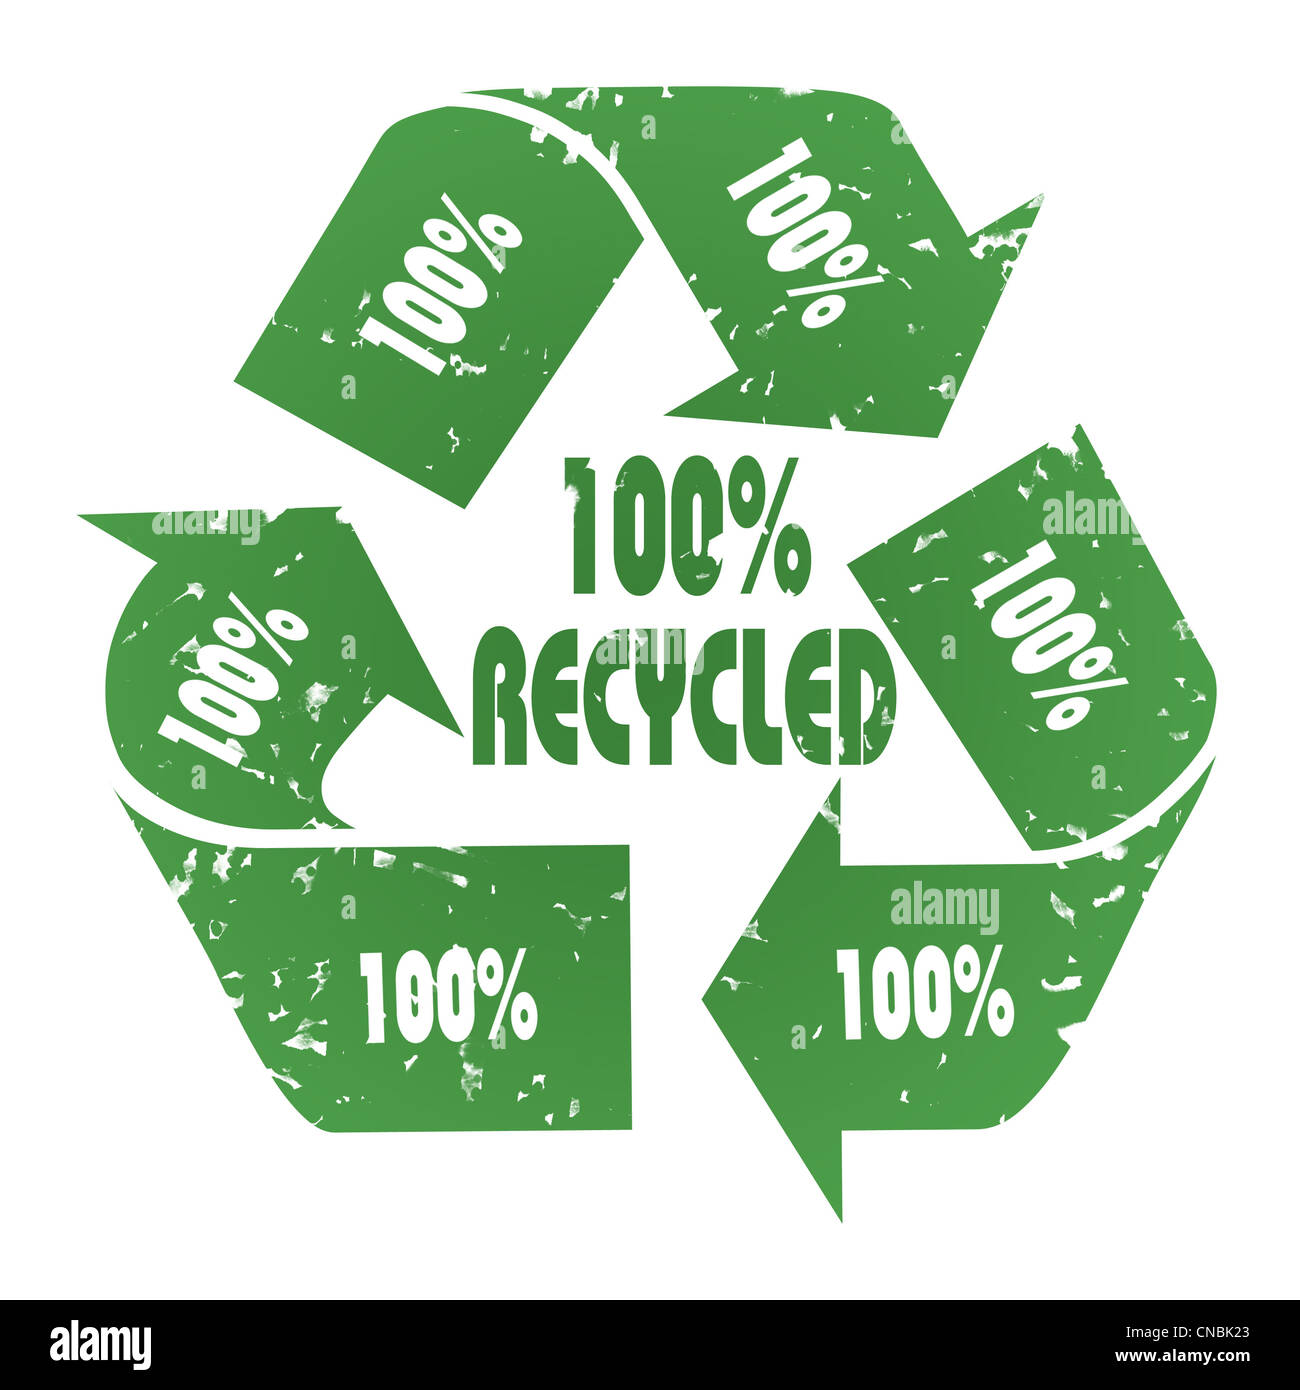 Three-arrow green 100% Recycled symbol with grunge effect - recycle concept Stock Photo